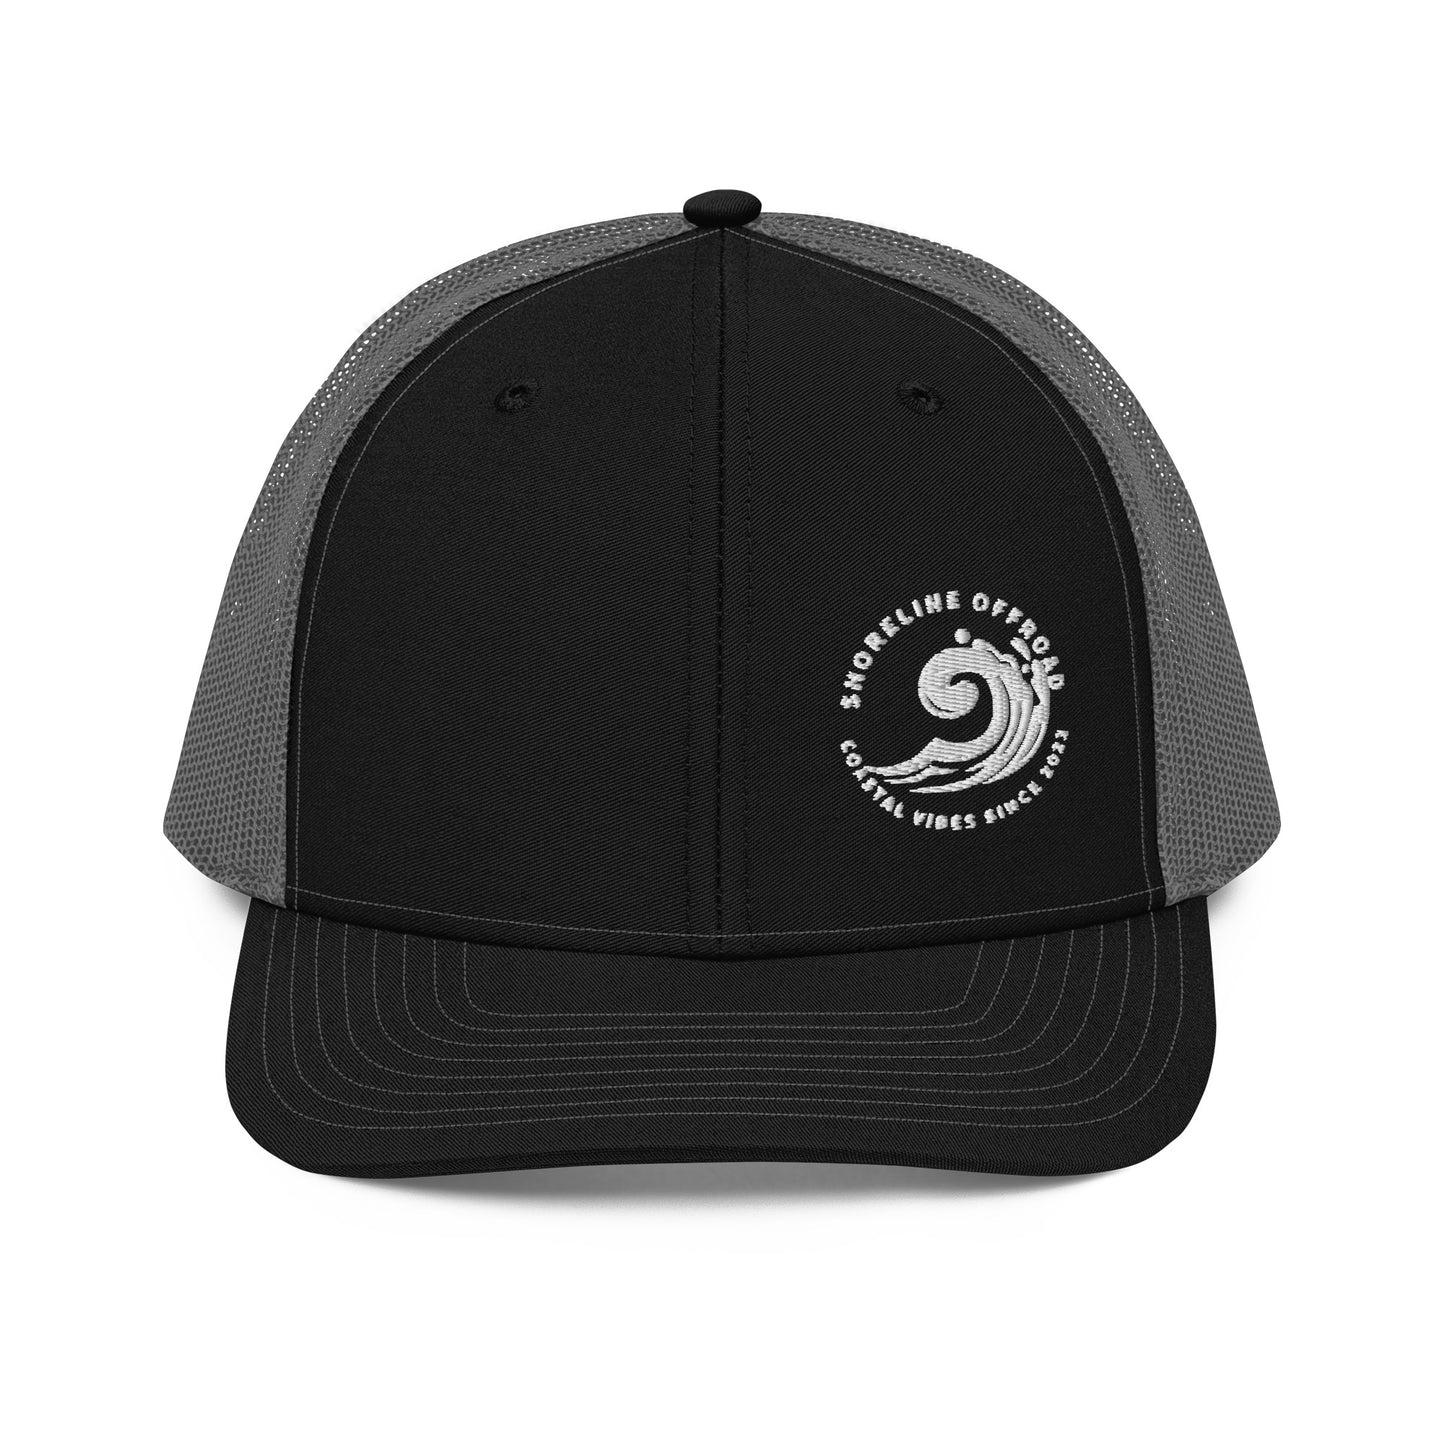 a black and grey trucker hat with a white logo